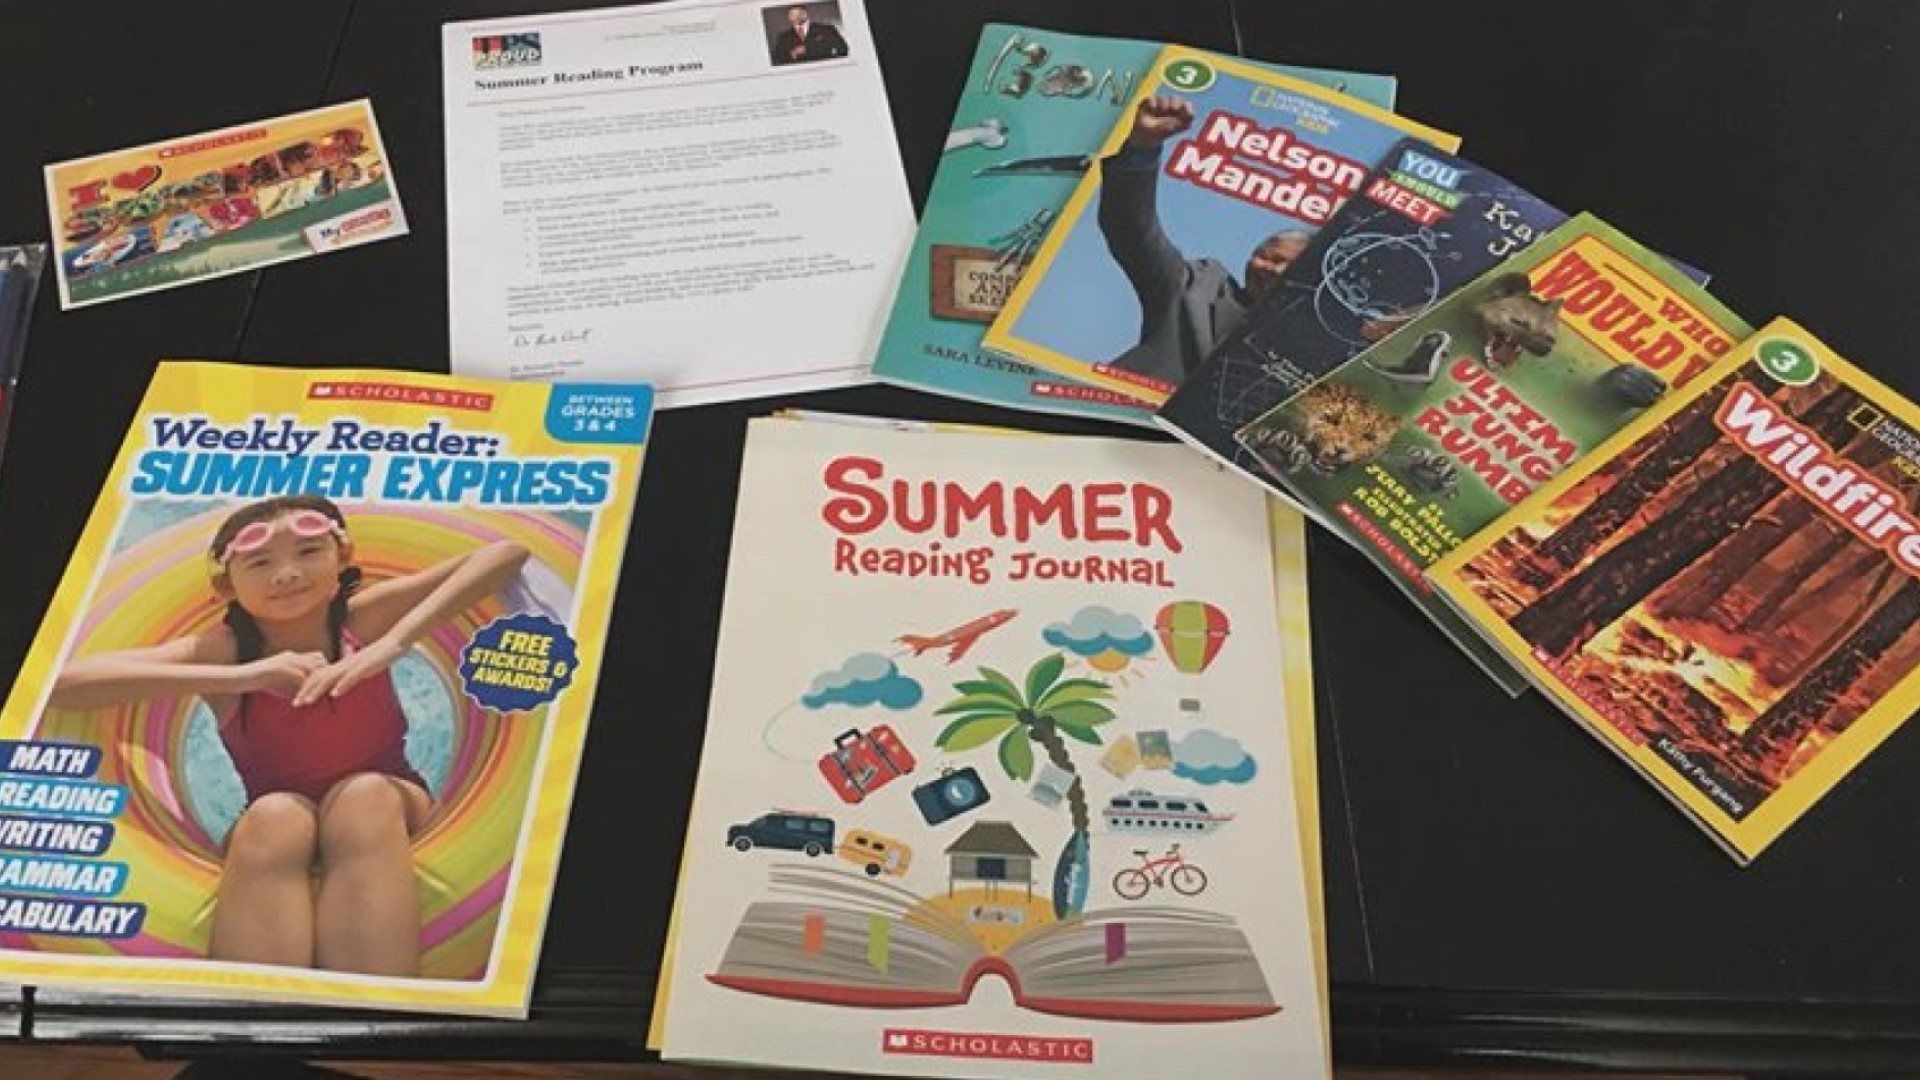 TPS is sending out summer reading books through partnership with Scholastic for all students in grades Pre-K to 4th.